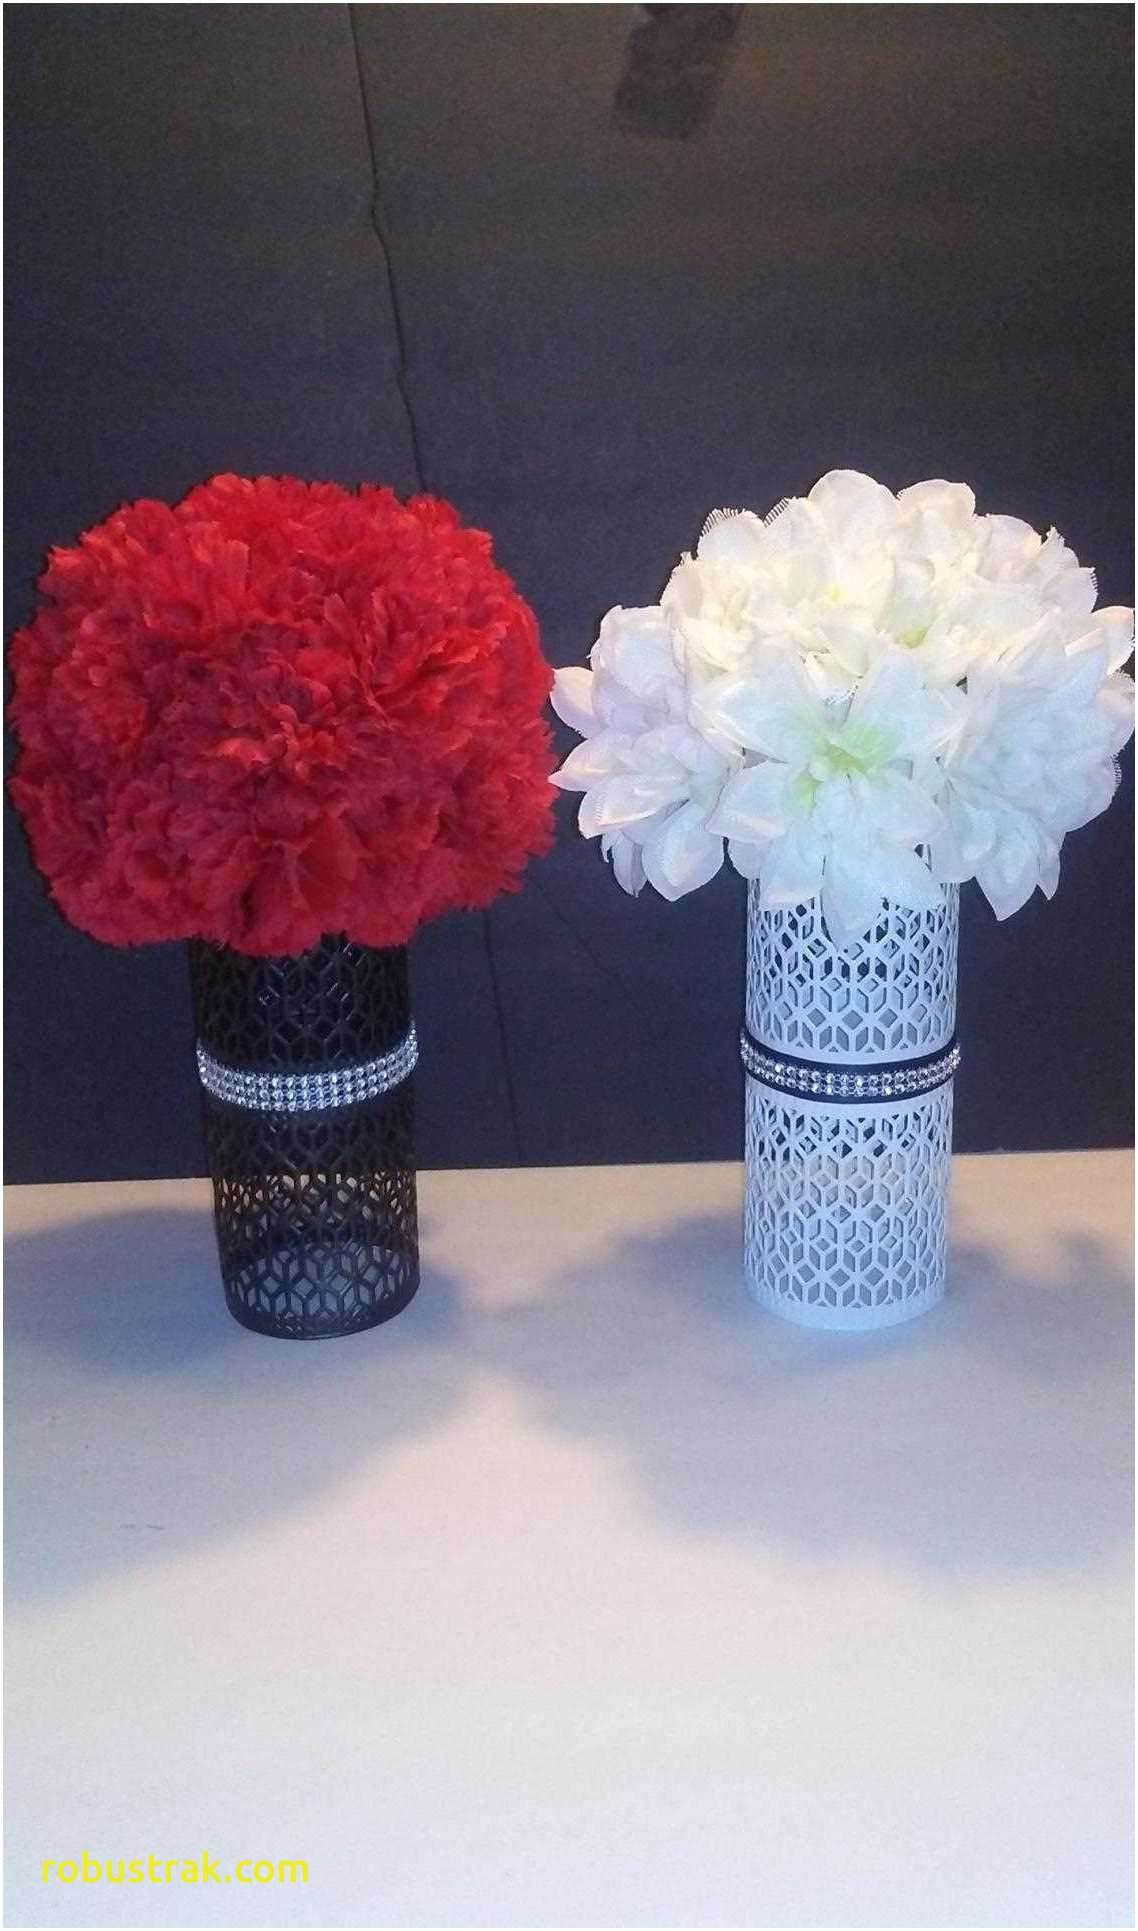 14 Famous Tall White Plastic Vases 2024 free download tall white plastic vases of inspirational how to decorate roses in a vase home design ideas throughout wedding decor flowers astounding dollar tree wedding decorations awesome h vases dollar